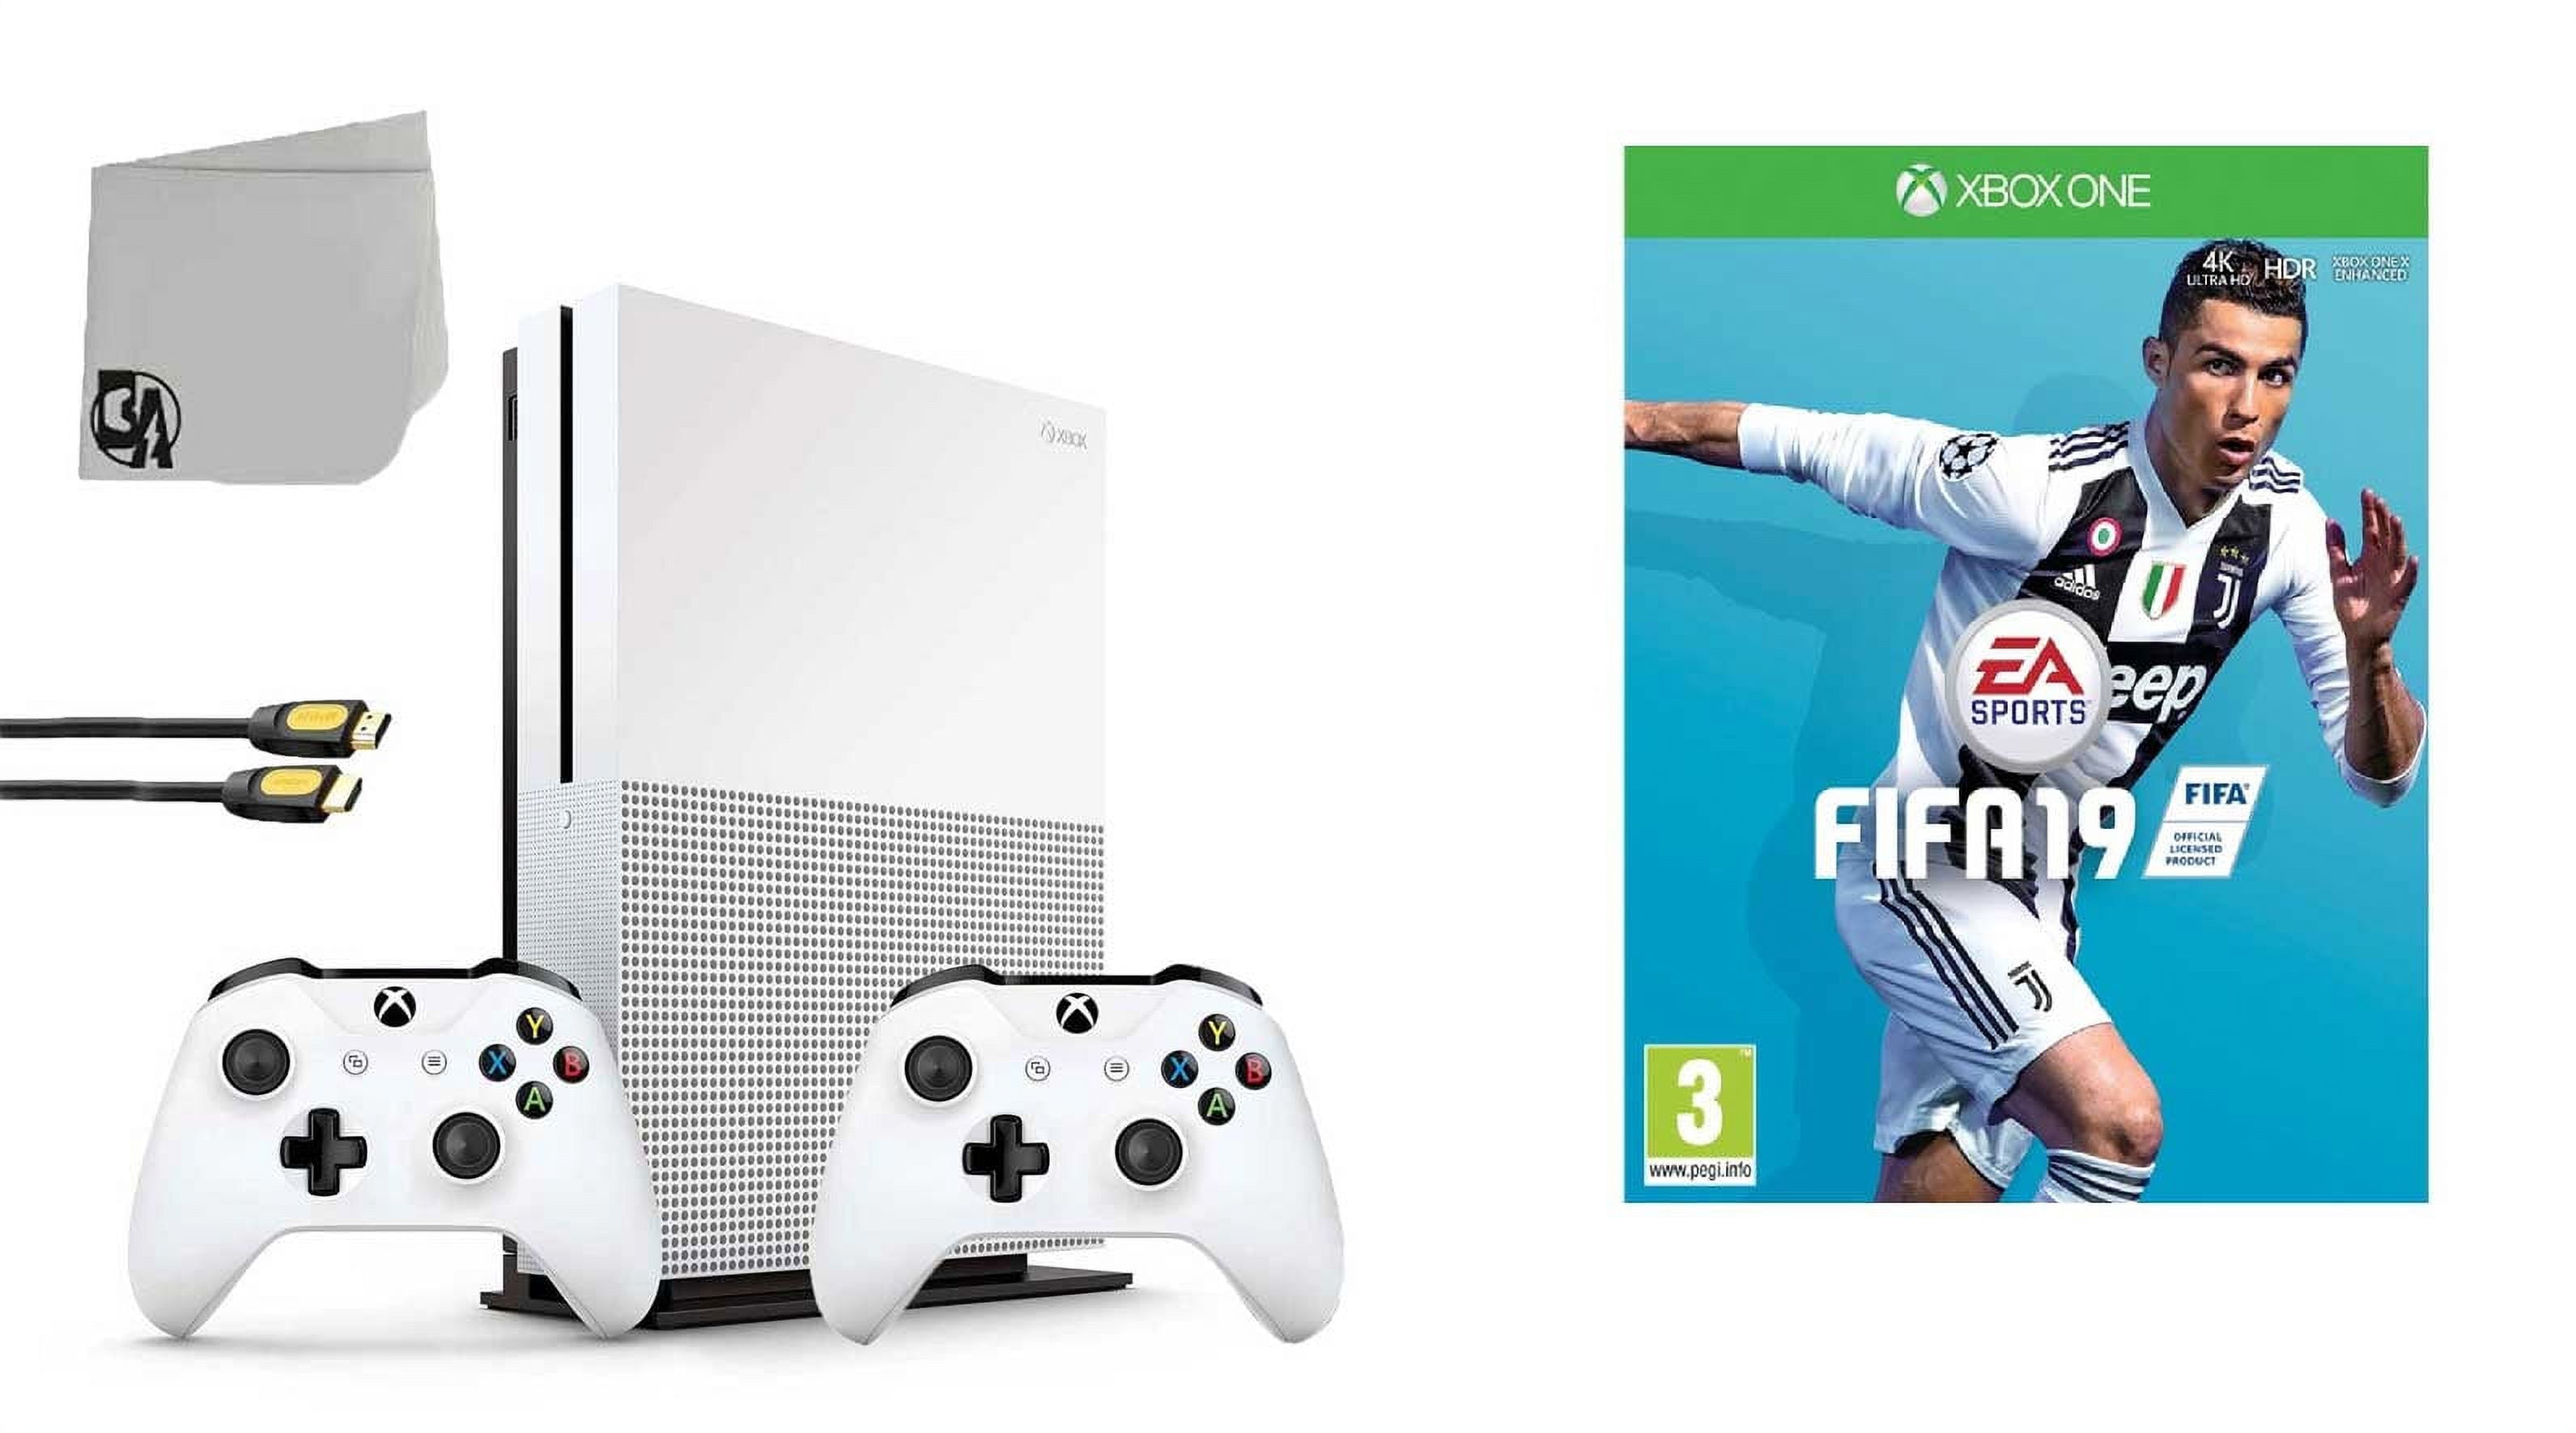 Buy Microsoft Xbox One S 1Tb Console - White [Discontinued] Online